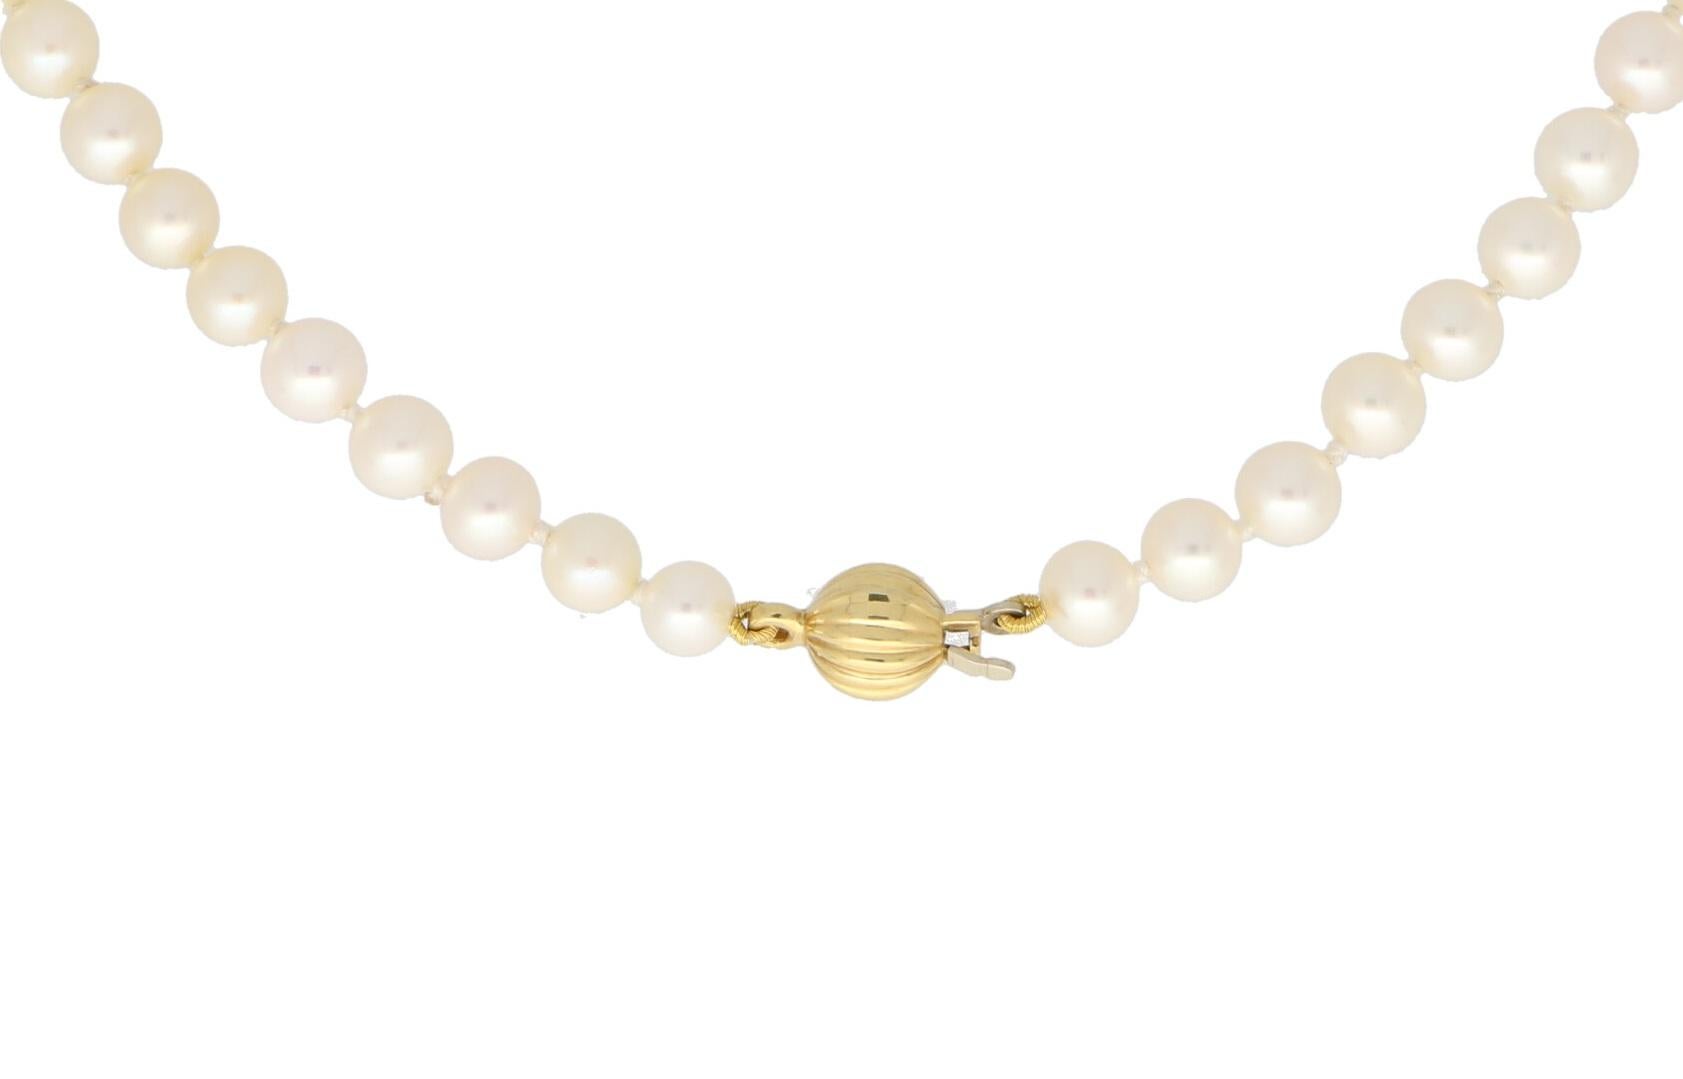 Modern White Pearl Strand Necklace Set with a 18k Yellow Gold Fluted Clasp